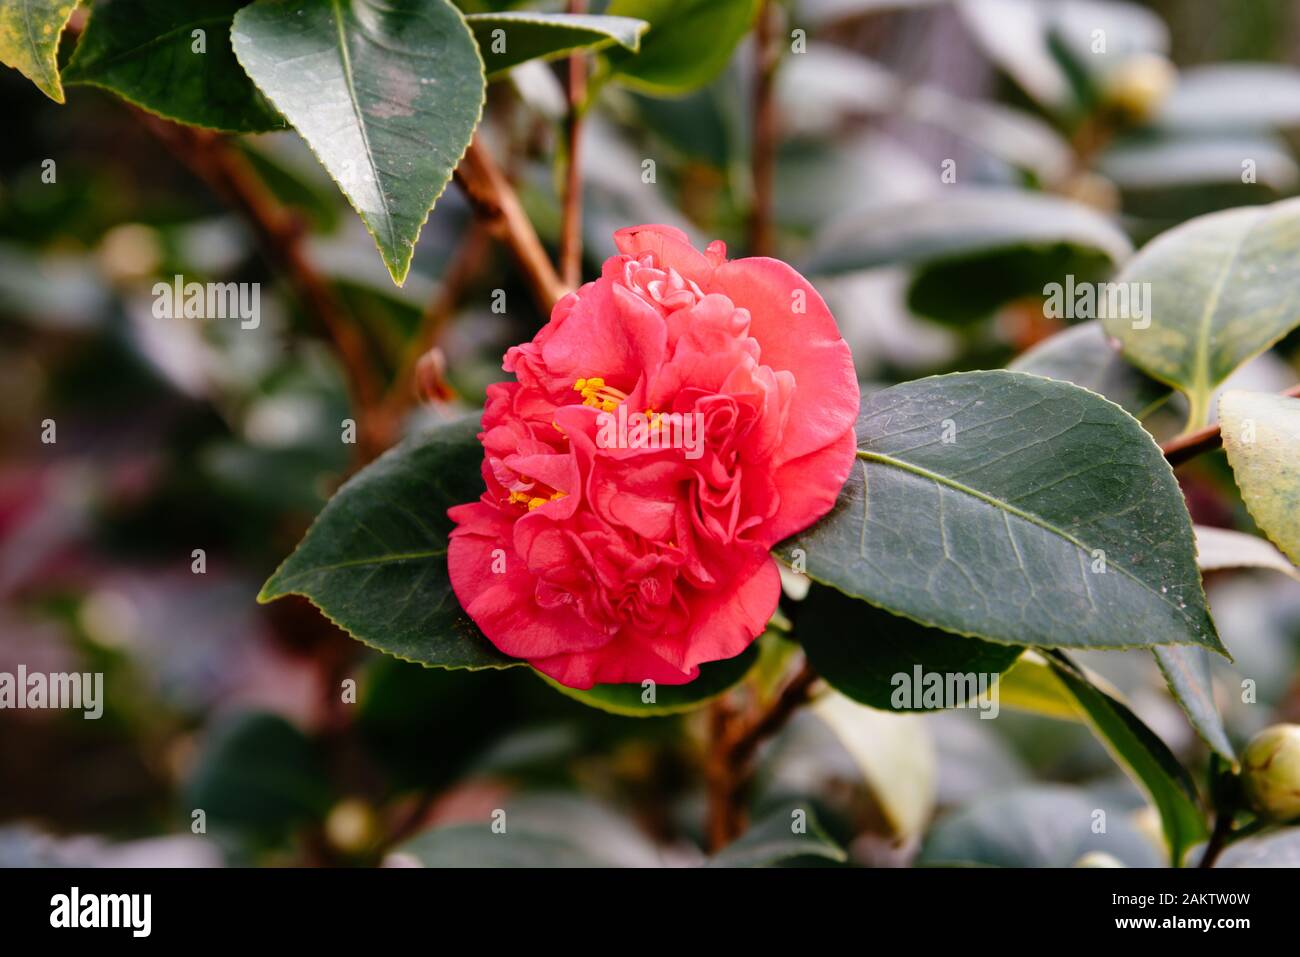 Close up view of Camellia Japonica, Japanese camellia, or tsubaki, it is a species of the genus Camellia. Sometimes called the rose of winter, it belo Stock Photo